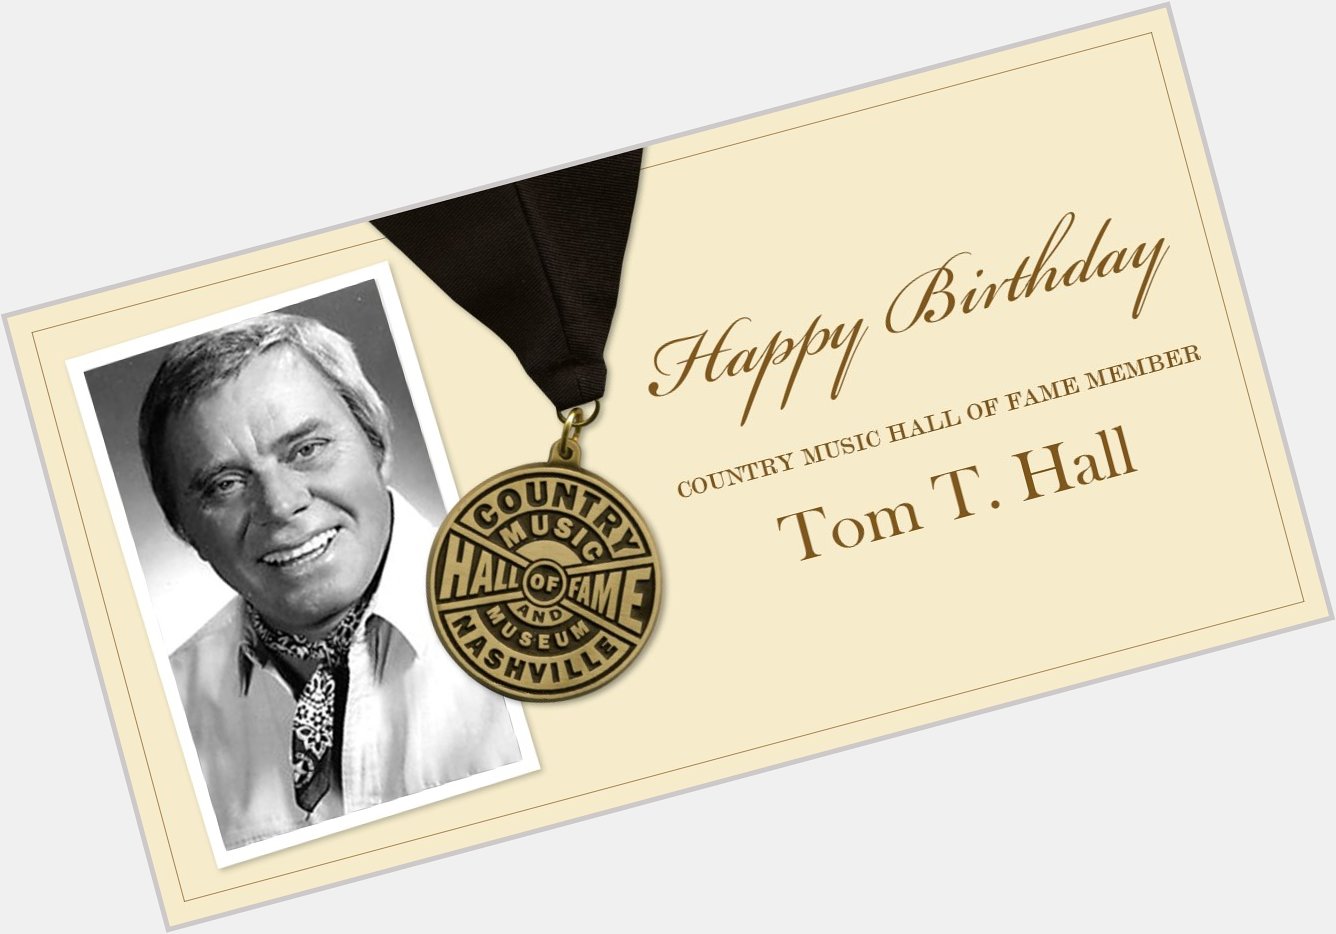 Help us wish \"Storyteller\" and CMHOF member Tom T. Hall a very happy birthday today! 